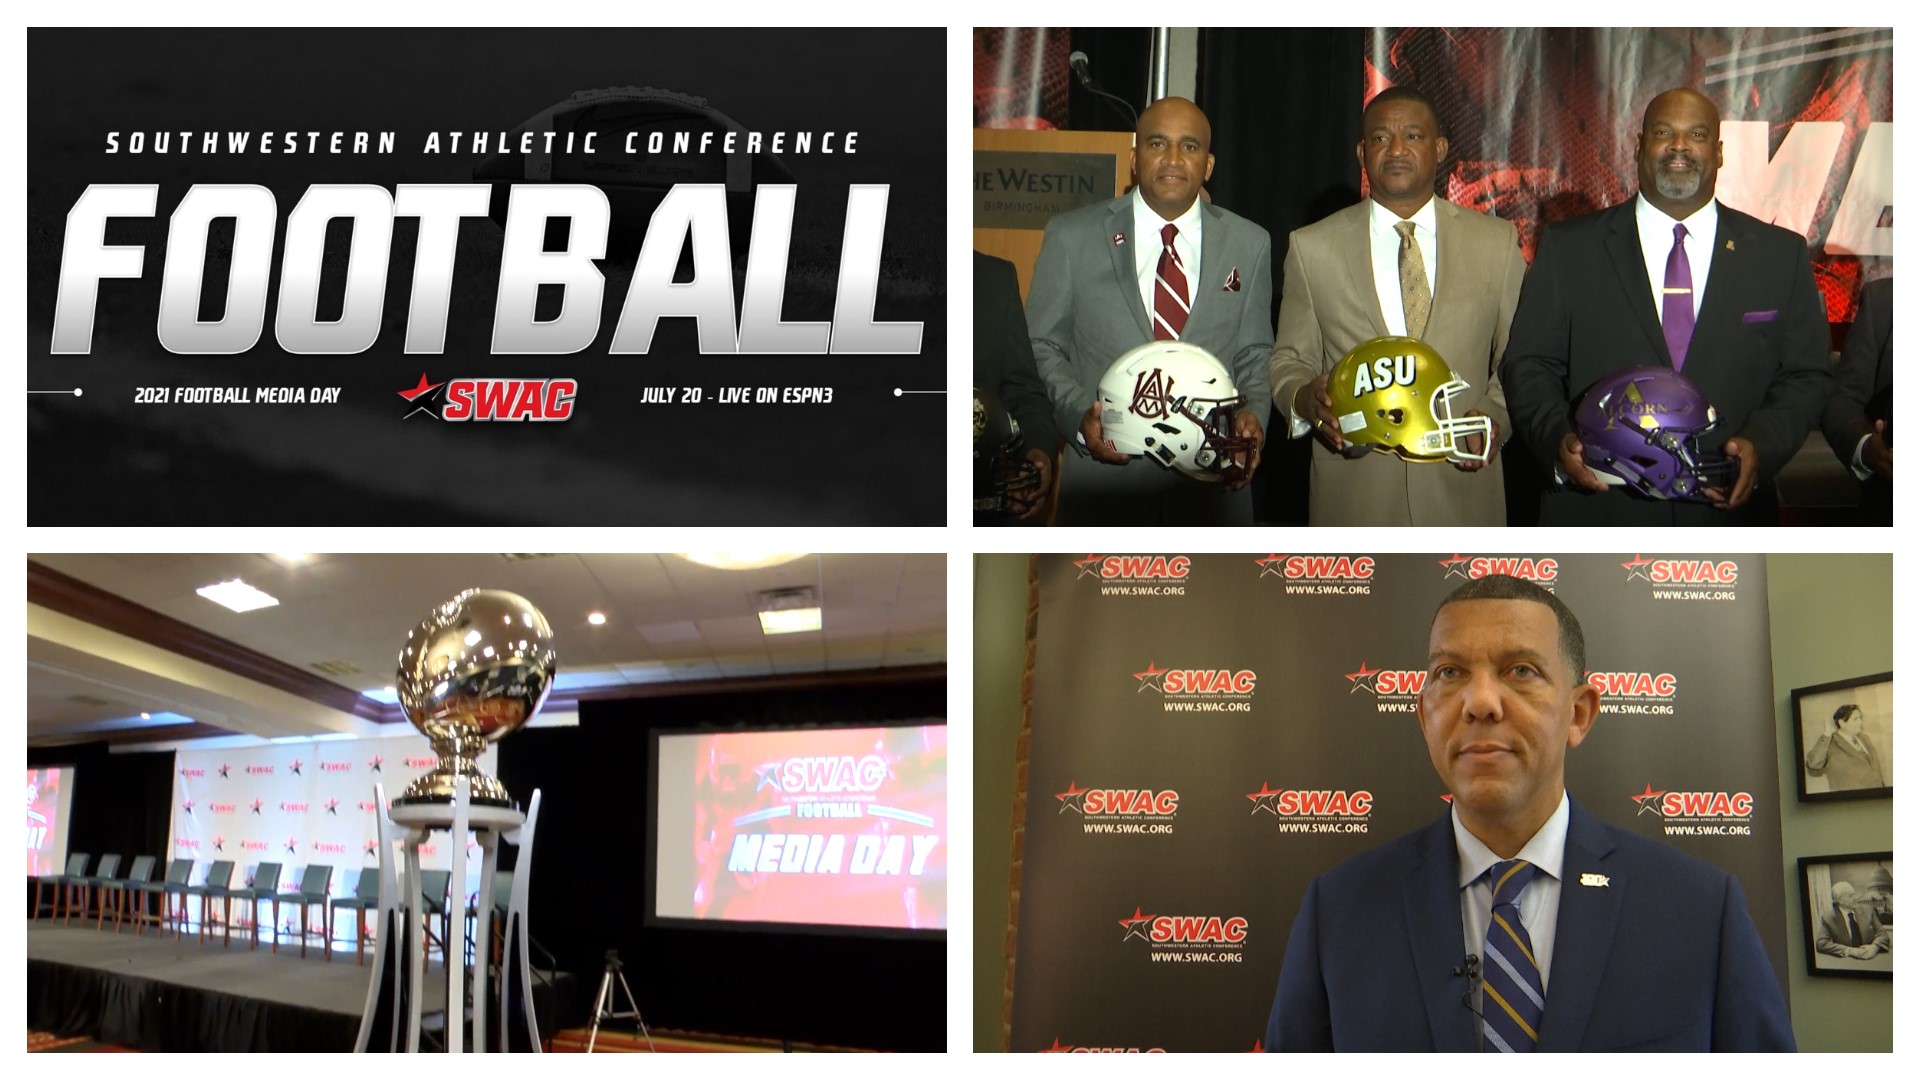 For the first time since 2019, the SWAC will host an in-person media day for football in July. Dr. Charles McClelland spoke to us about the event and fall season.